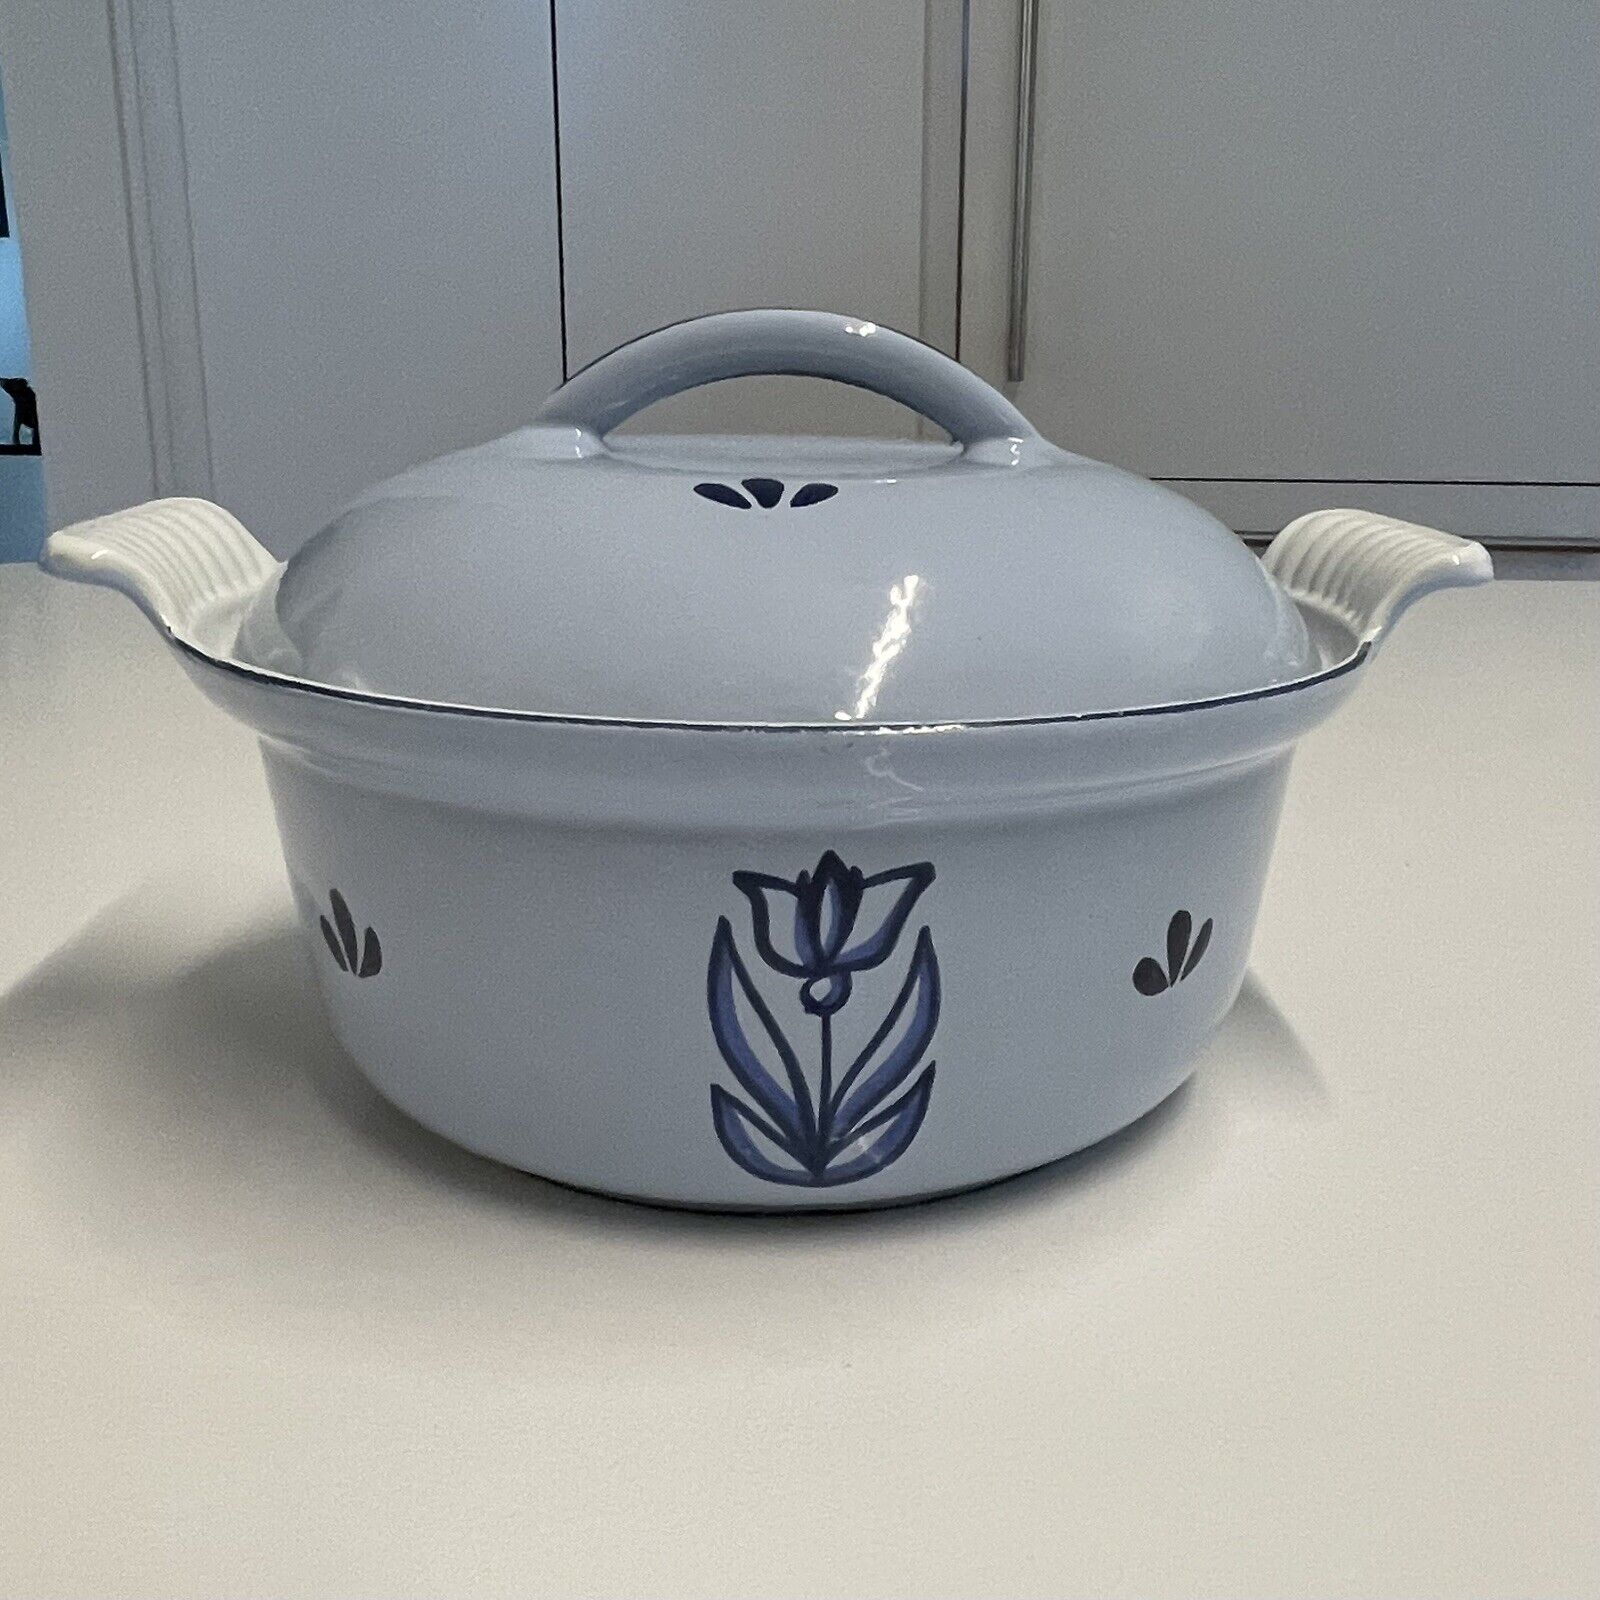 Dru Holland 7.25” Dutch Oven Enameled Cast Iron Made In Holland